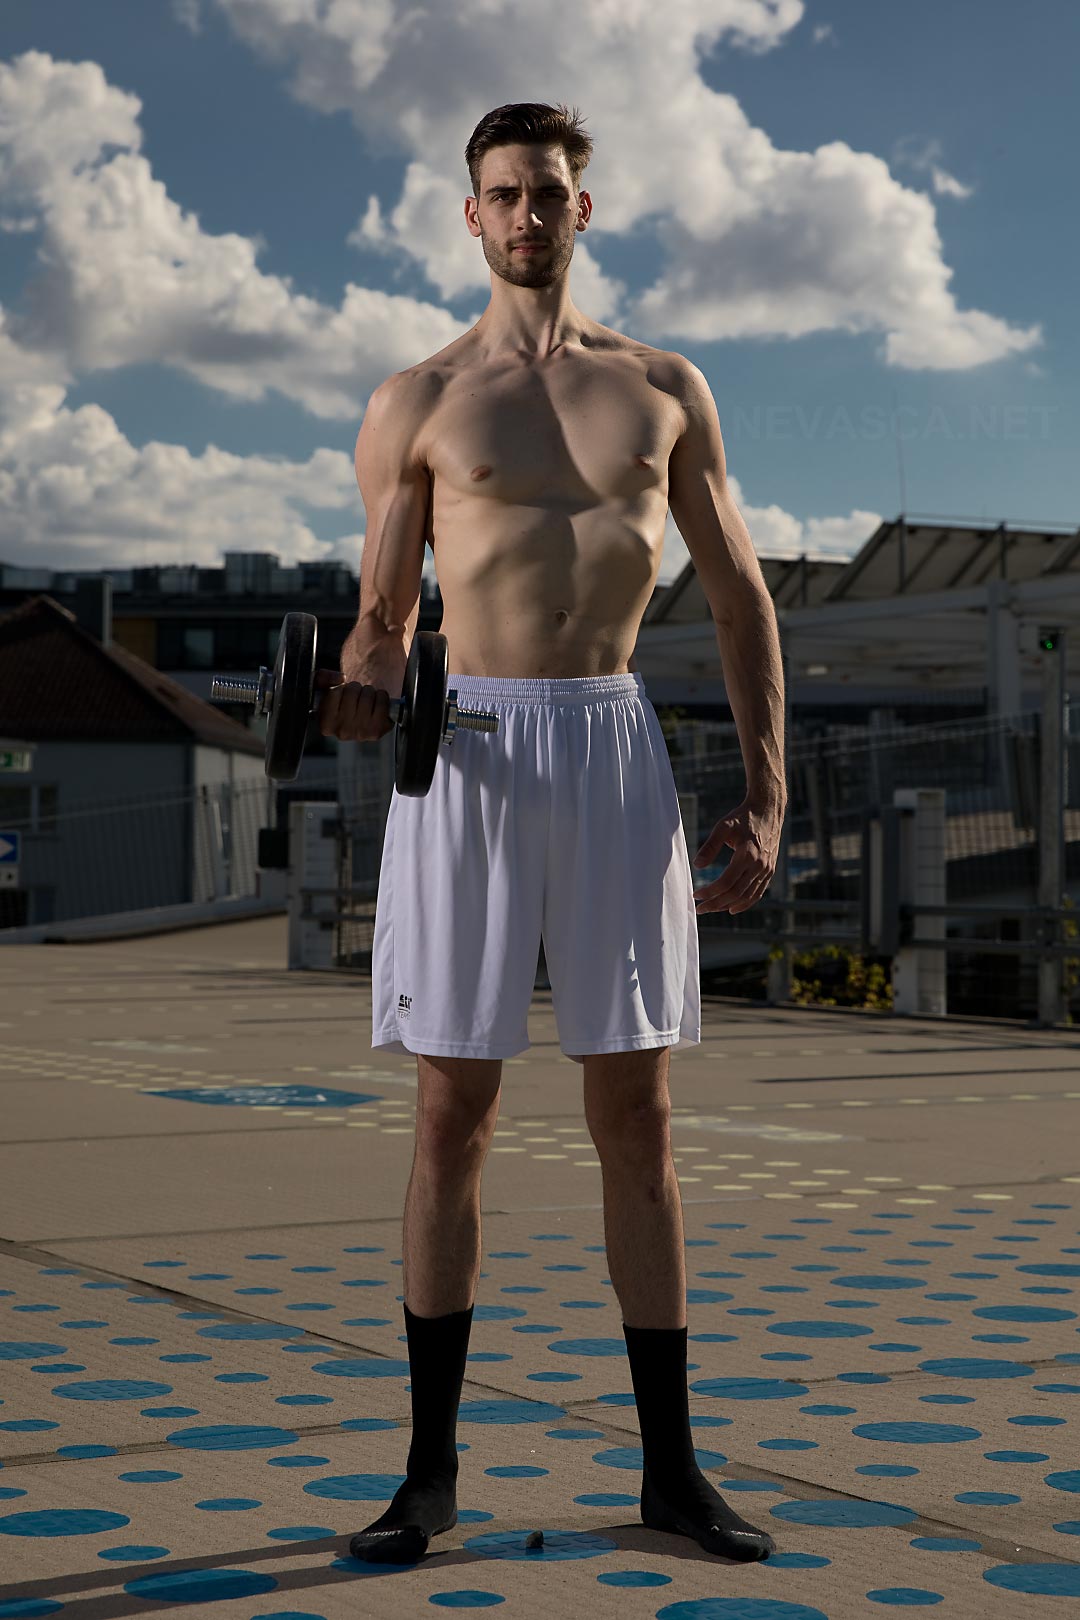 A young man standing on a parking space is holding a dumbbell.